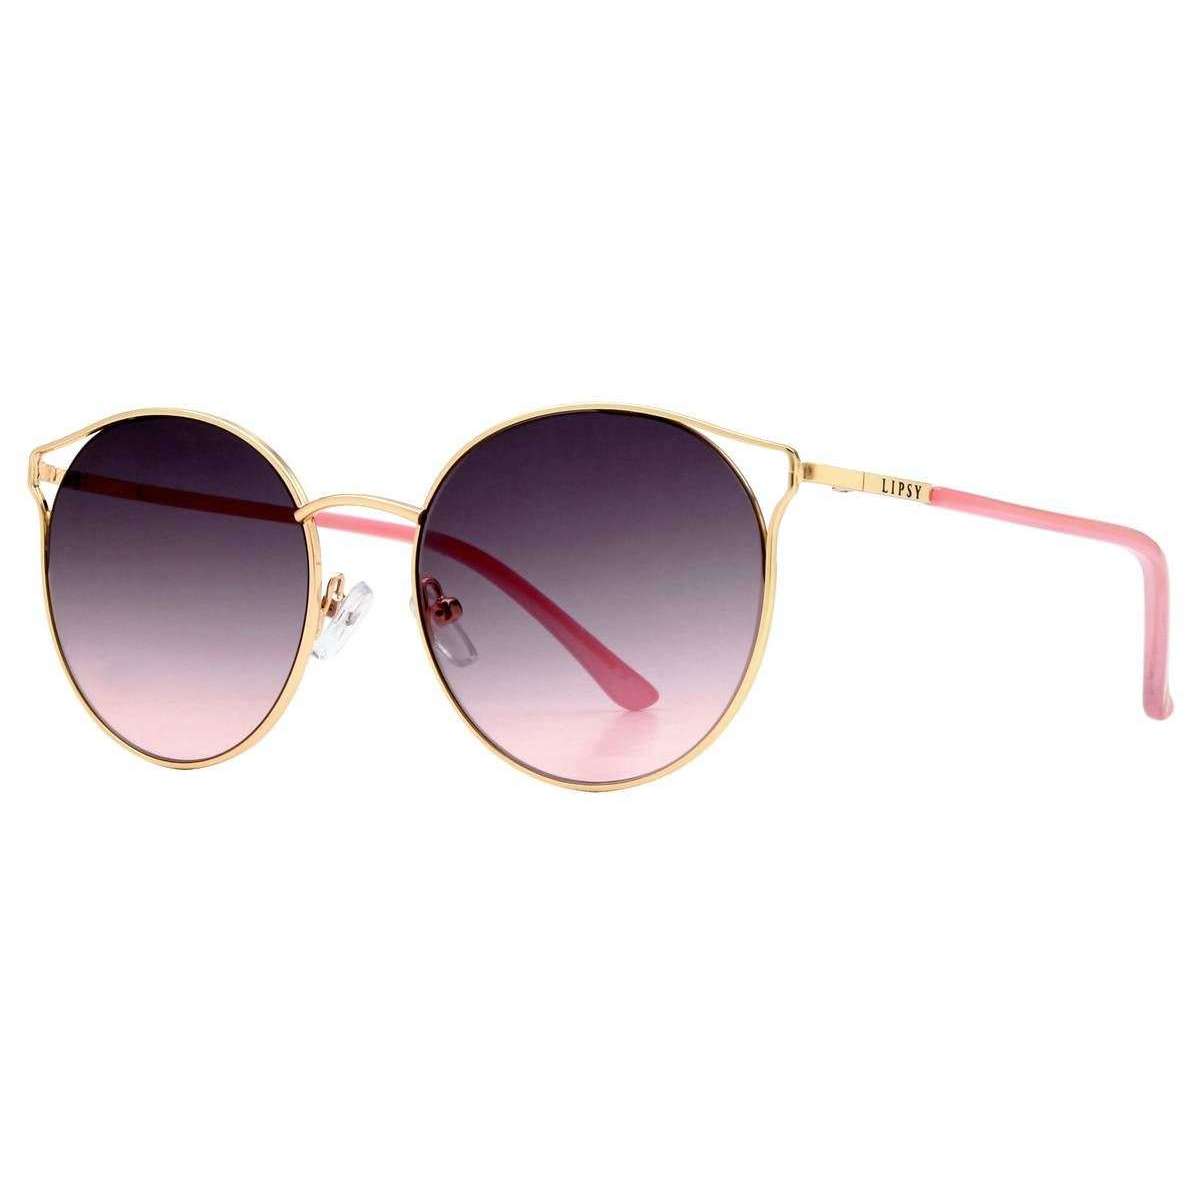 Lipsy London D-Frame Diamante Round Sunglasses - Red/Gold